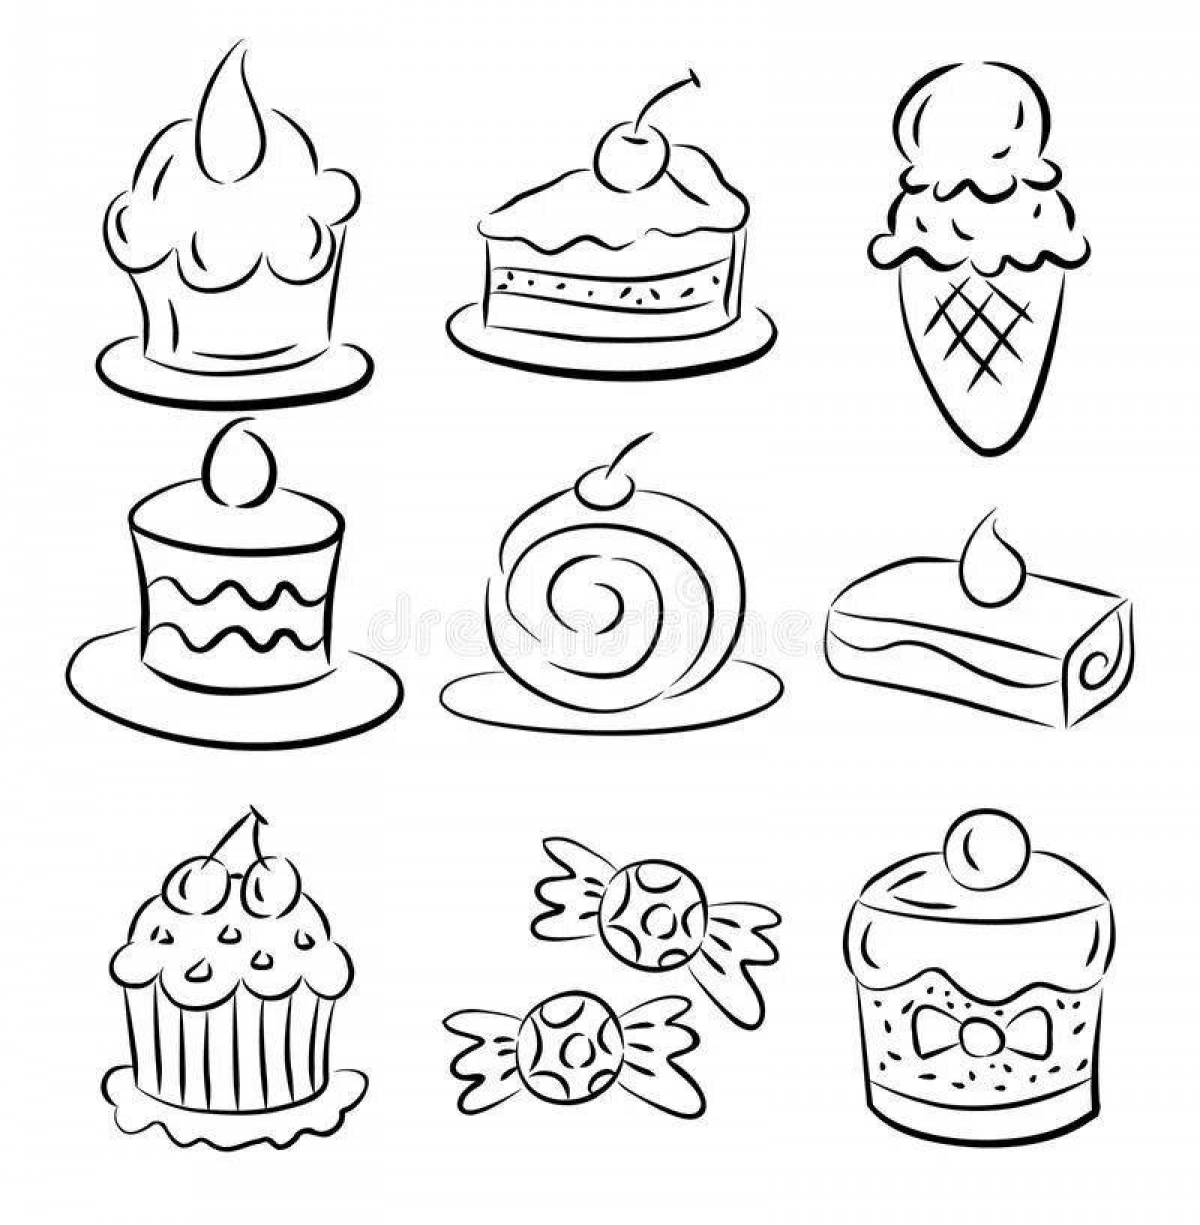 Awesome confectionery coloring book for kids